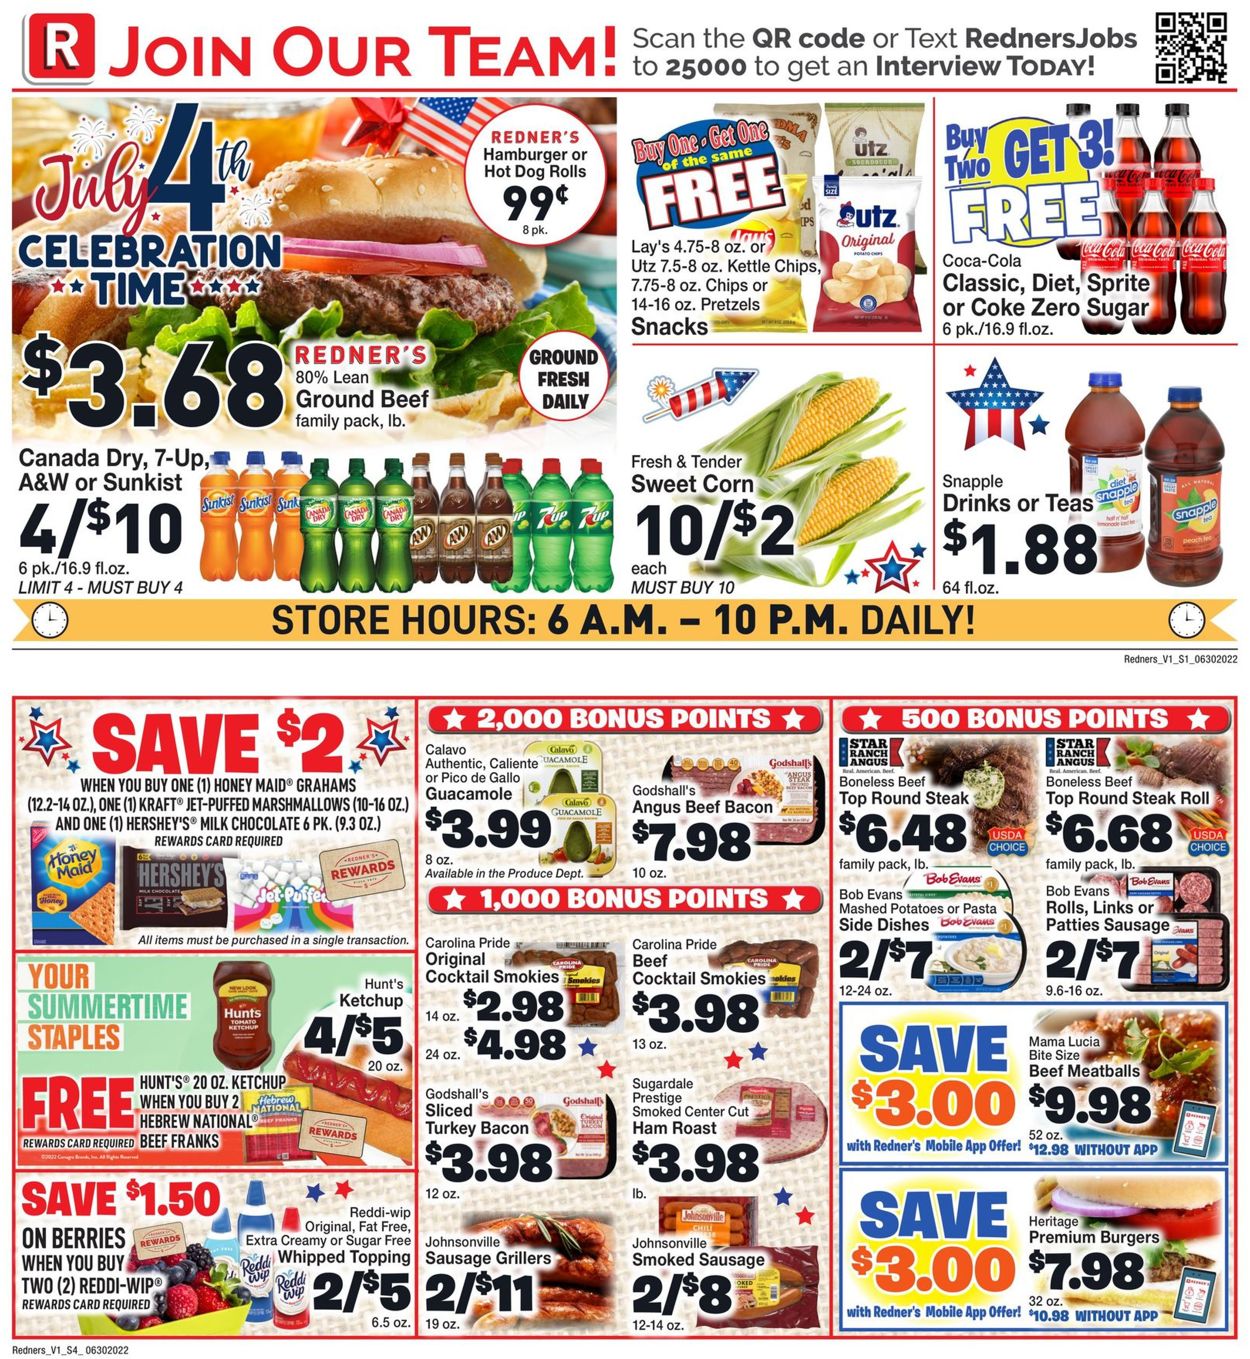 Redner’s Warehouse Market - 4th of July Sale Weekly Ad Circular - valid 06/30-07/06/2022 (Page 2)